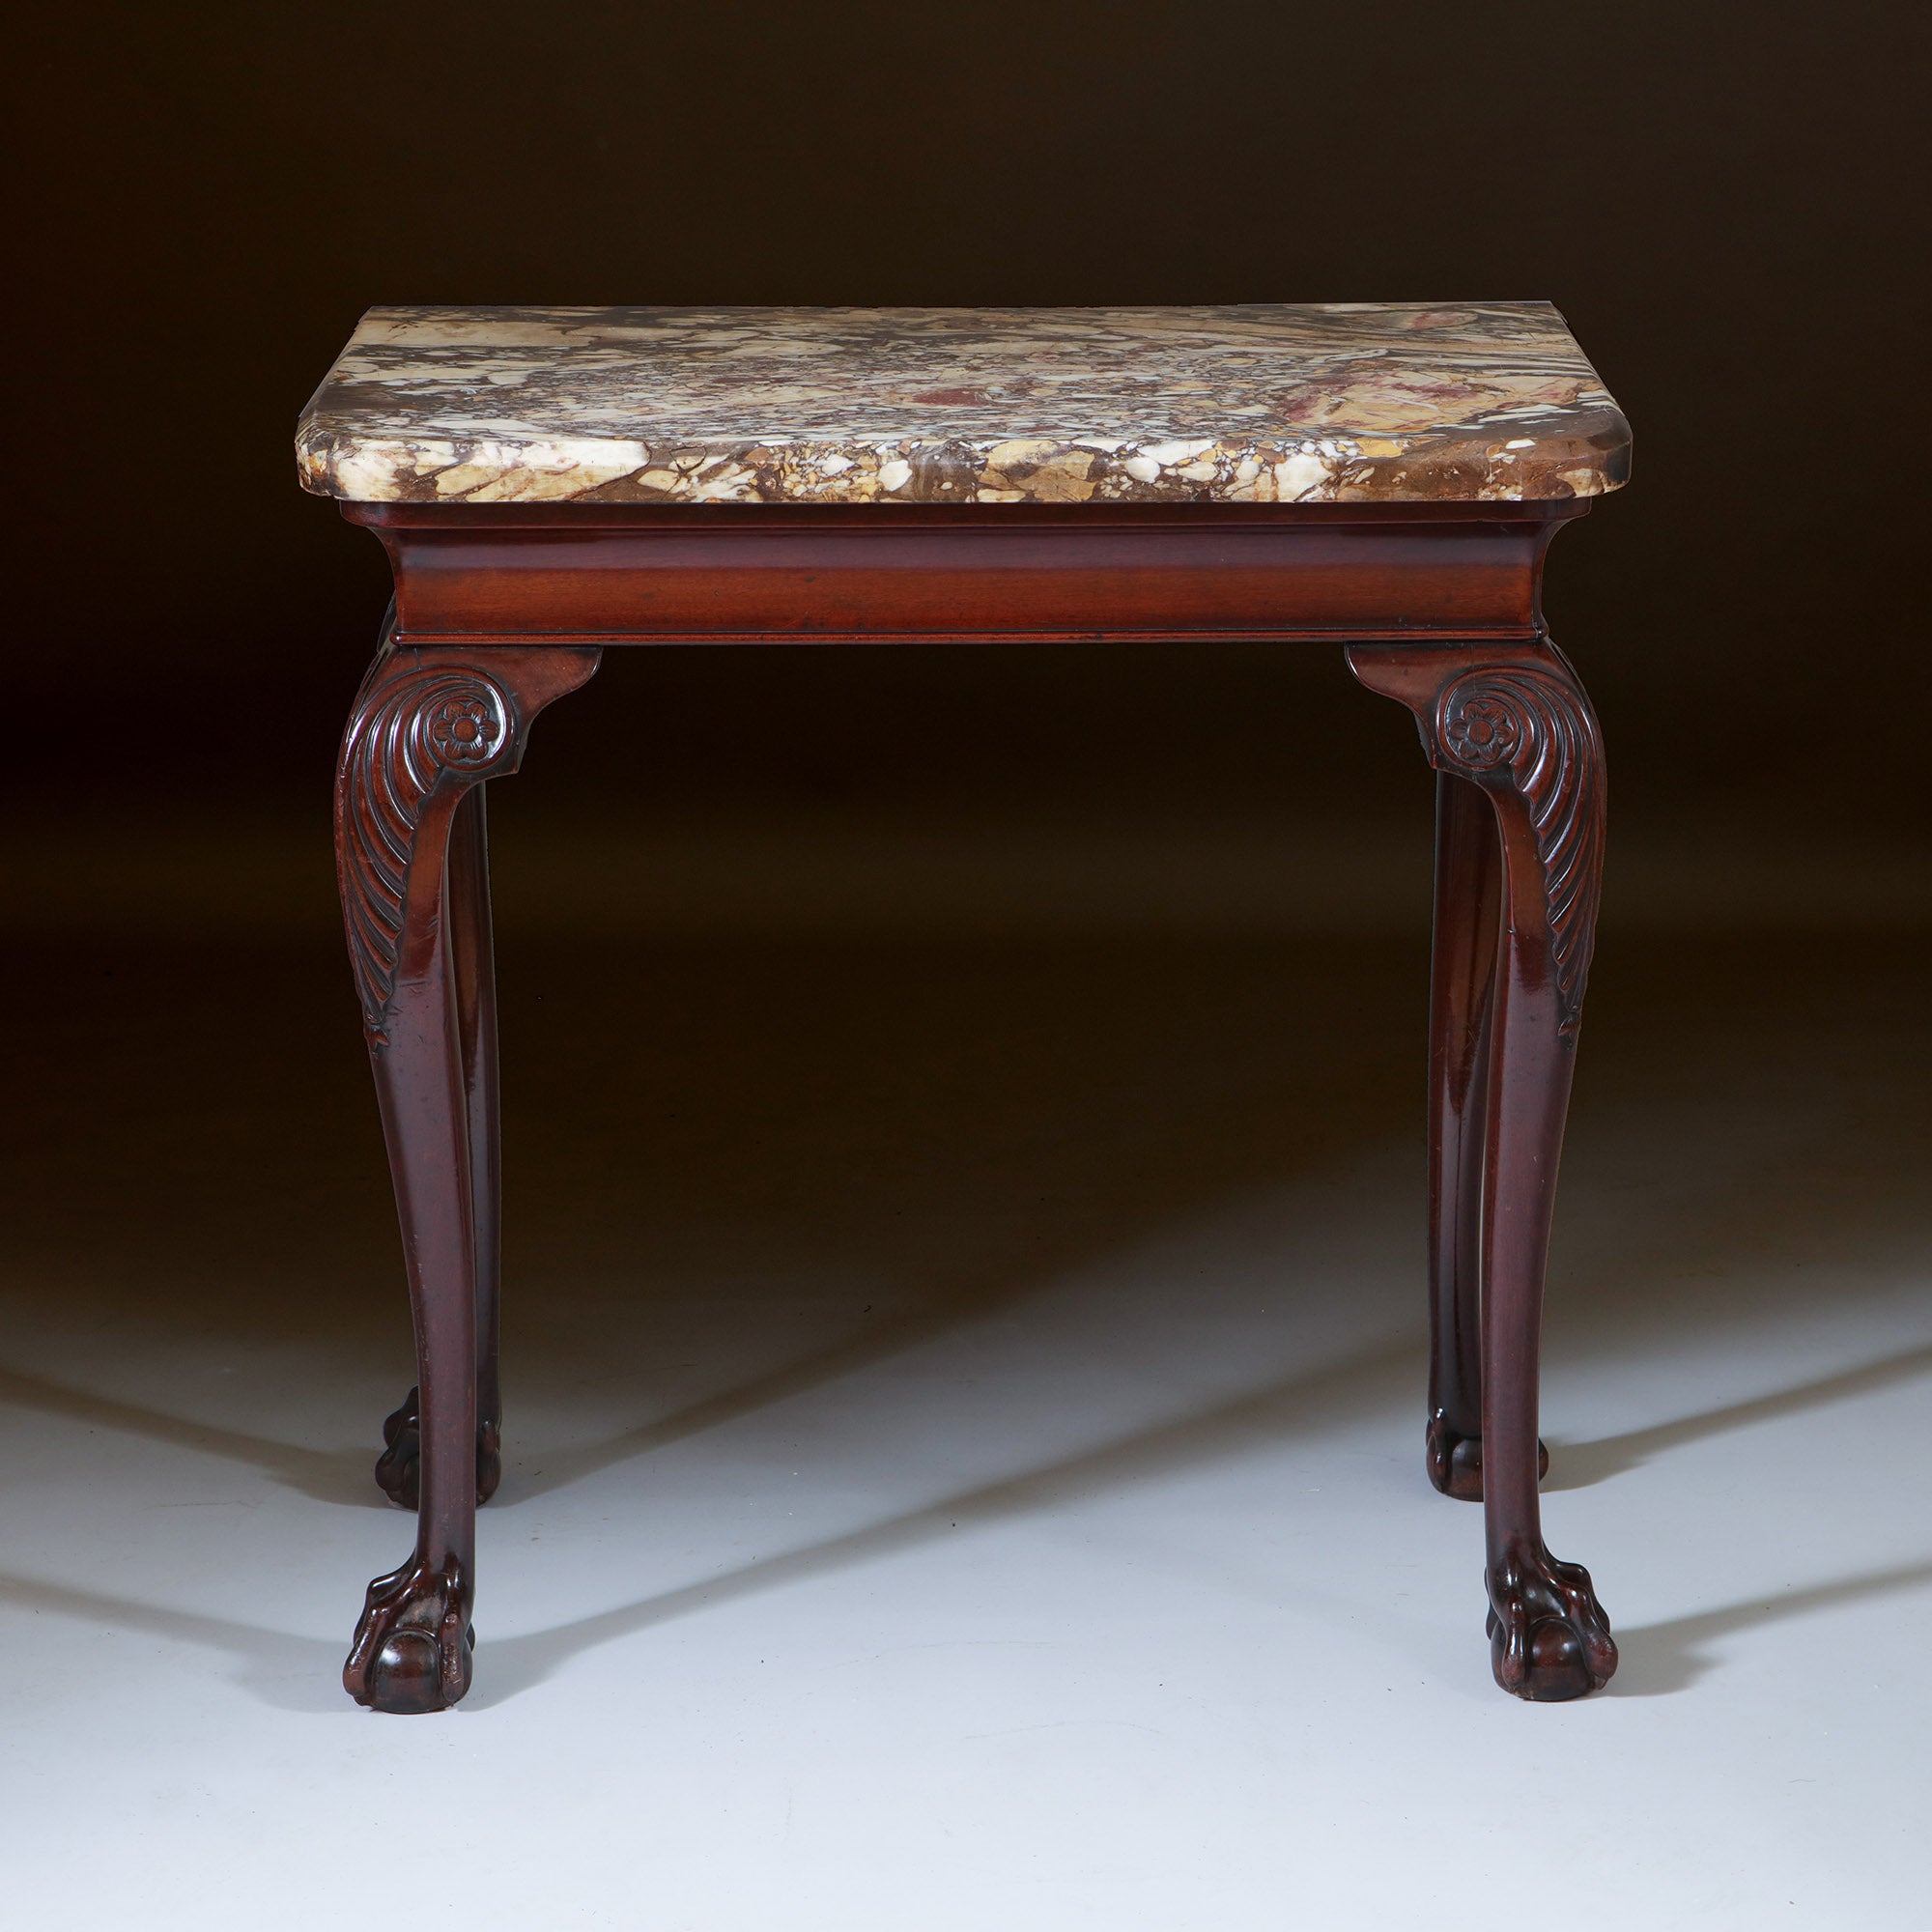 A Fine 18th Century George II Mahogany Marble Topped Console Table, Ireland 1